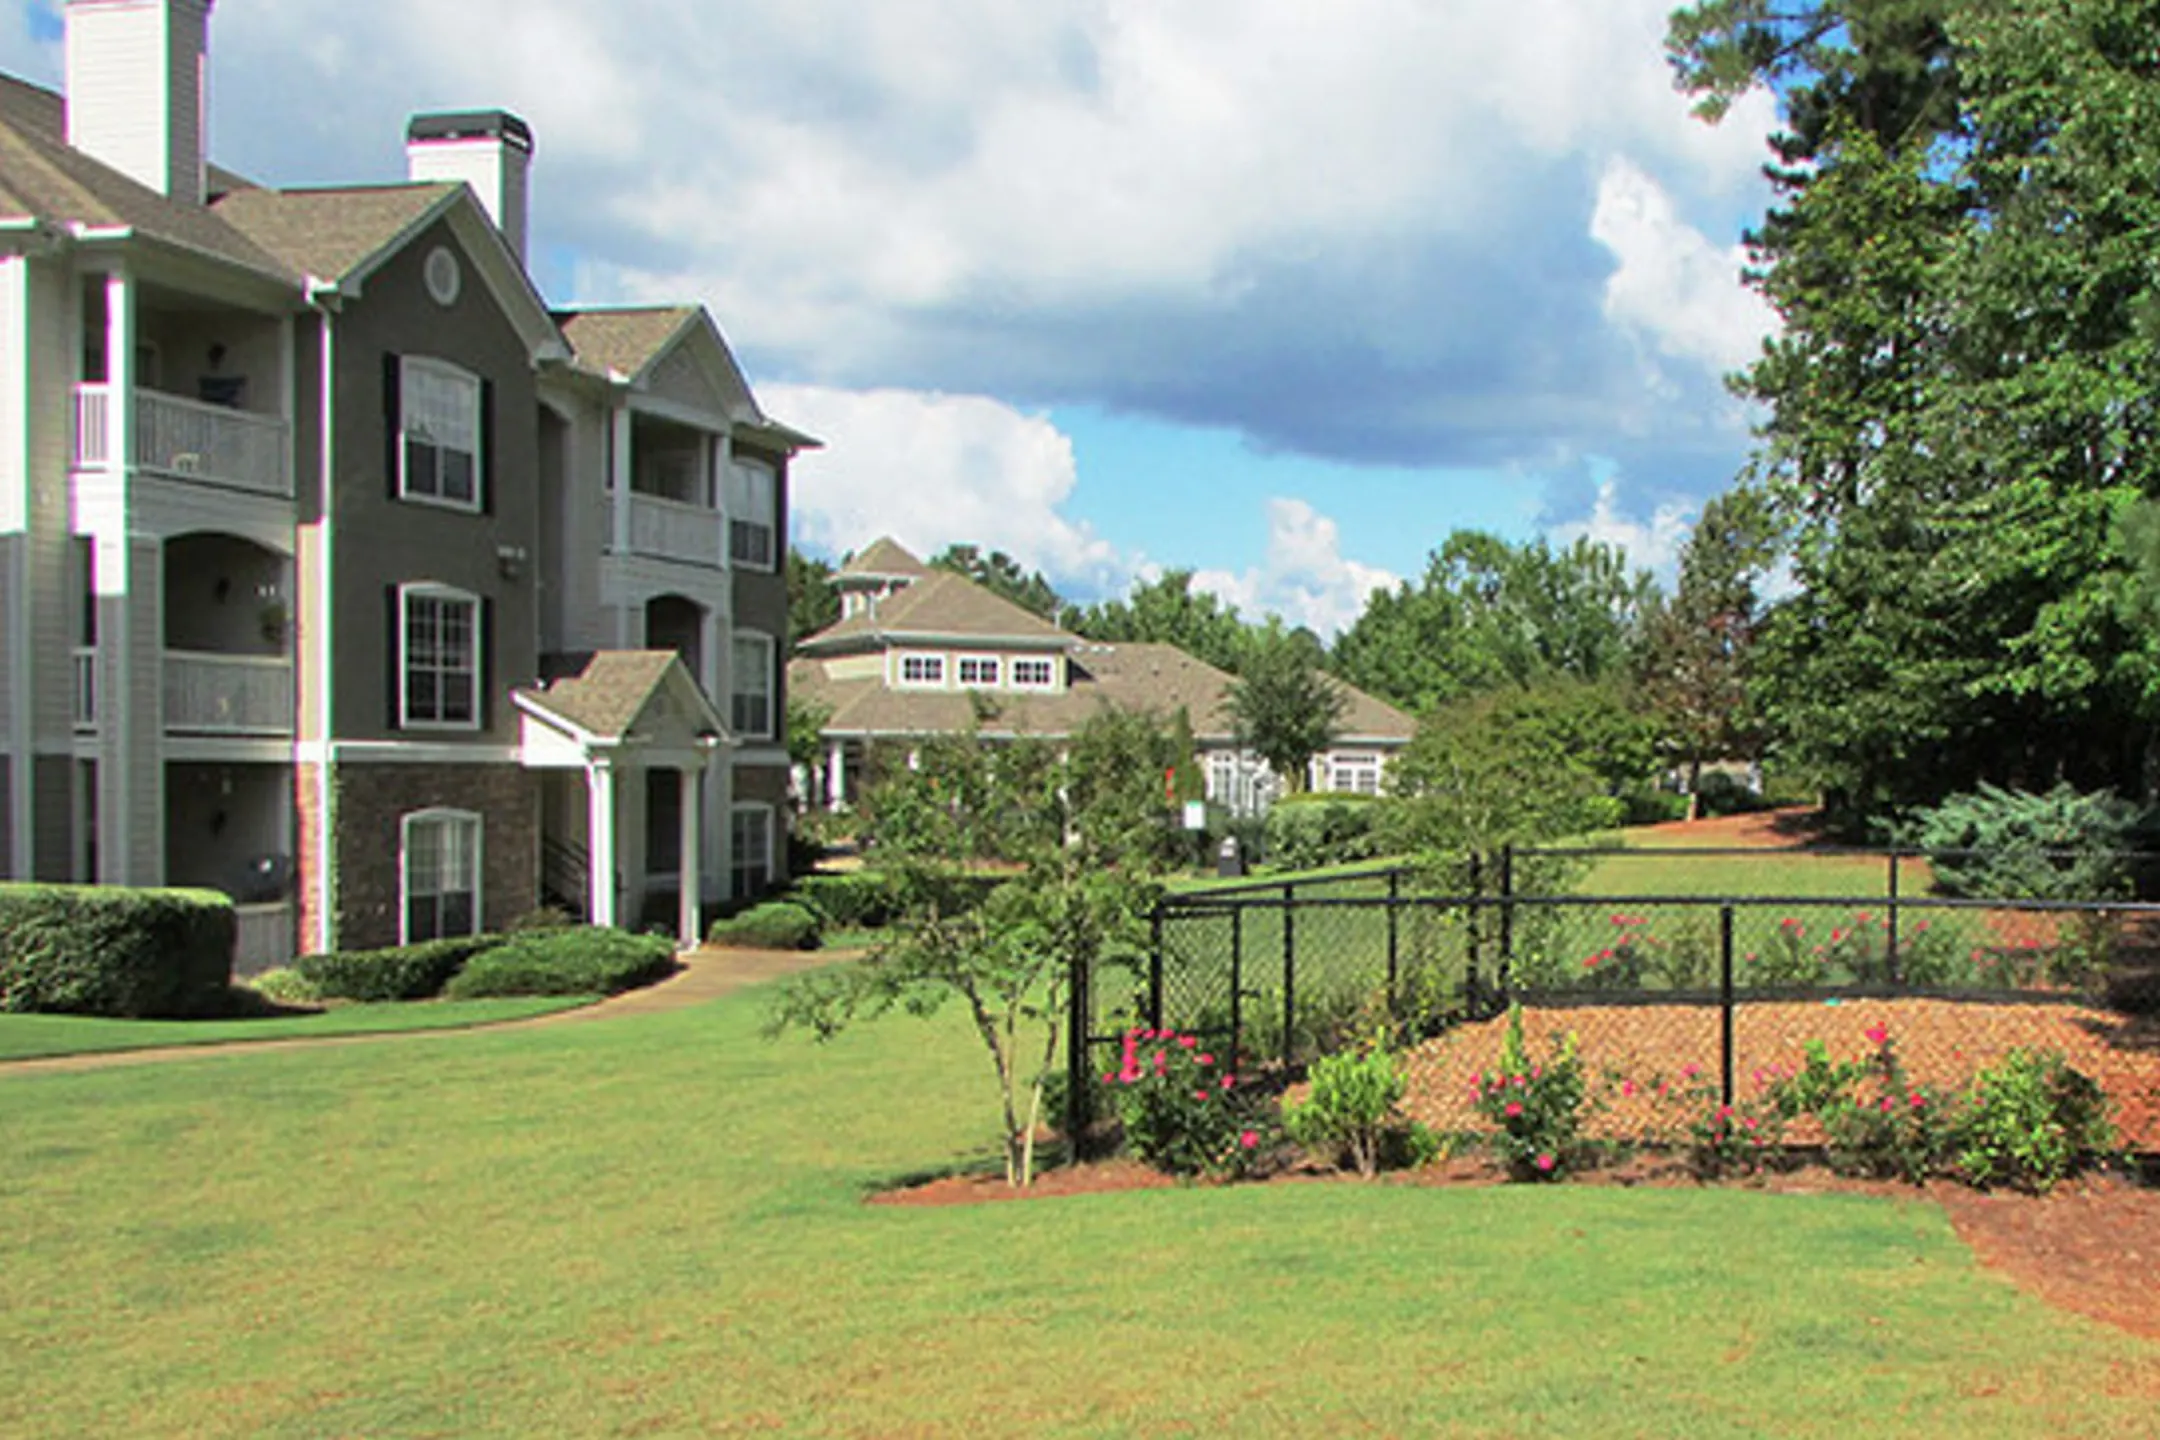 Building - The Heights at Towne Lake - Woodstock, GA